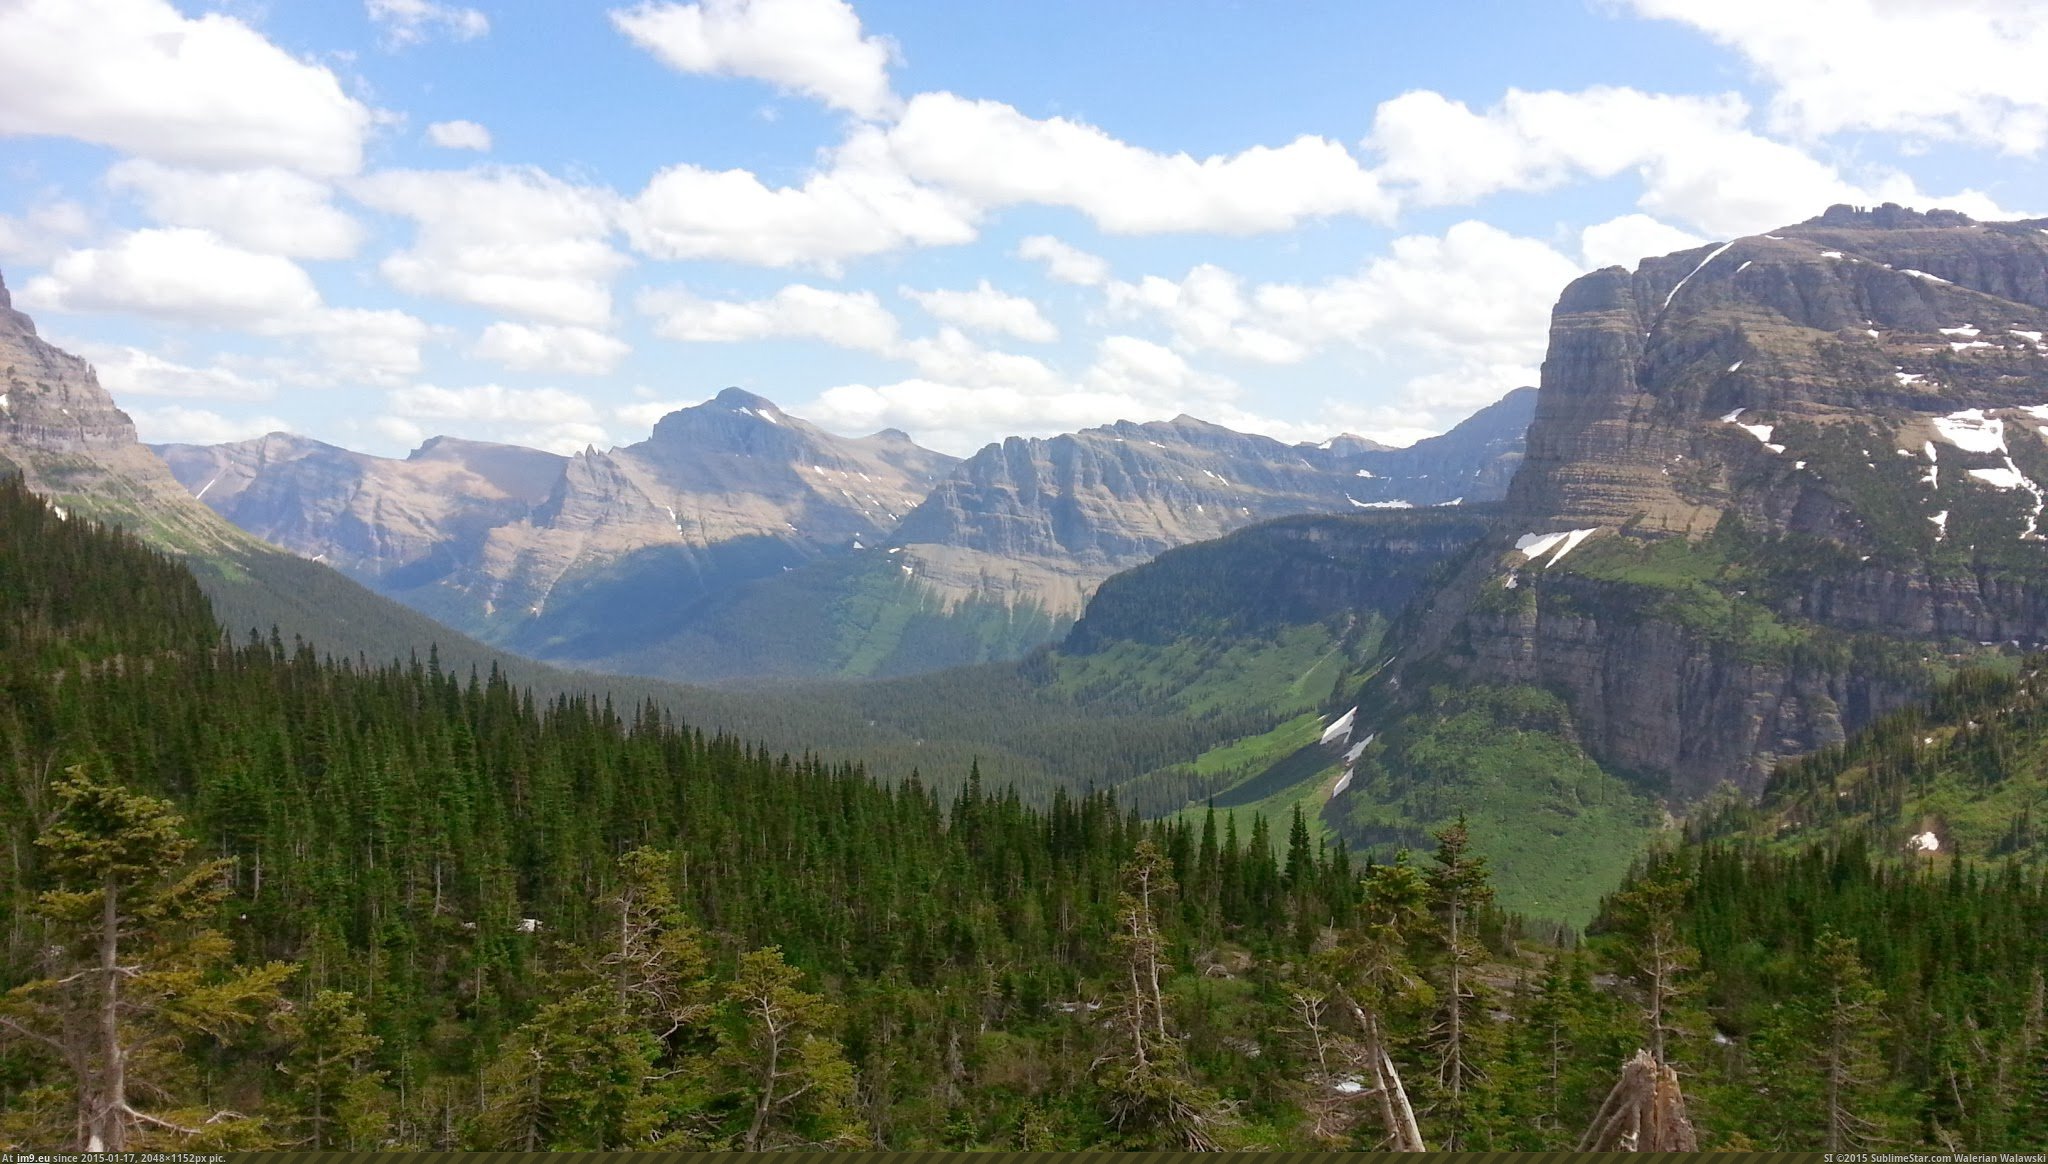 [Earthporn] Glacier National Park, just before Logan Pass. One of my favorite stops on the way to Alberta from Montana. [2048x11 (in My r/EARTHPORN favs)